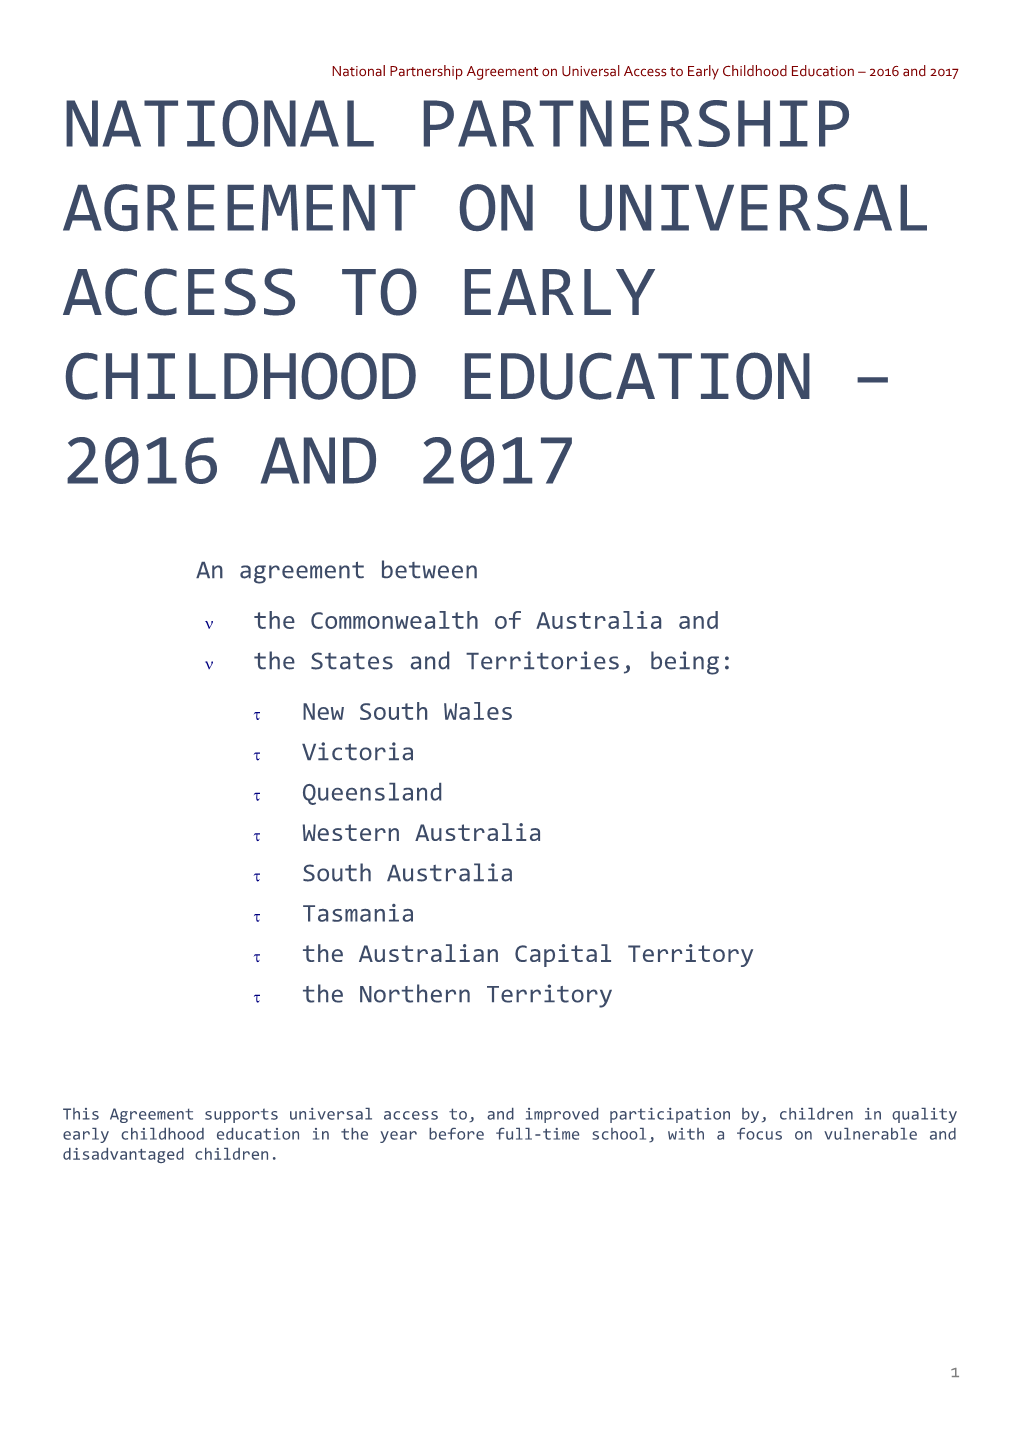 Universal Access to Early Childhood Education 2016 and 2017